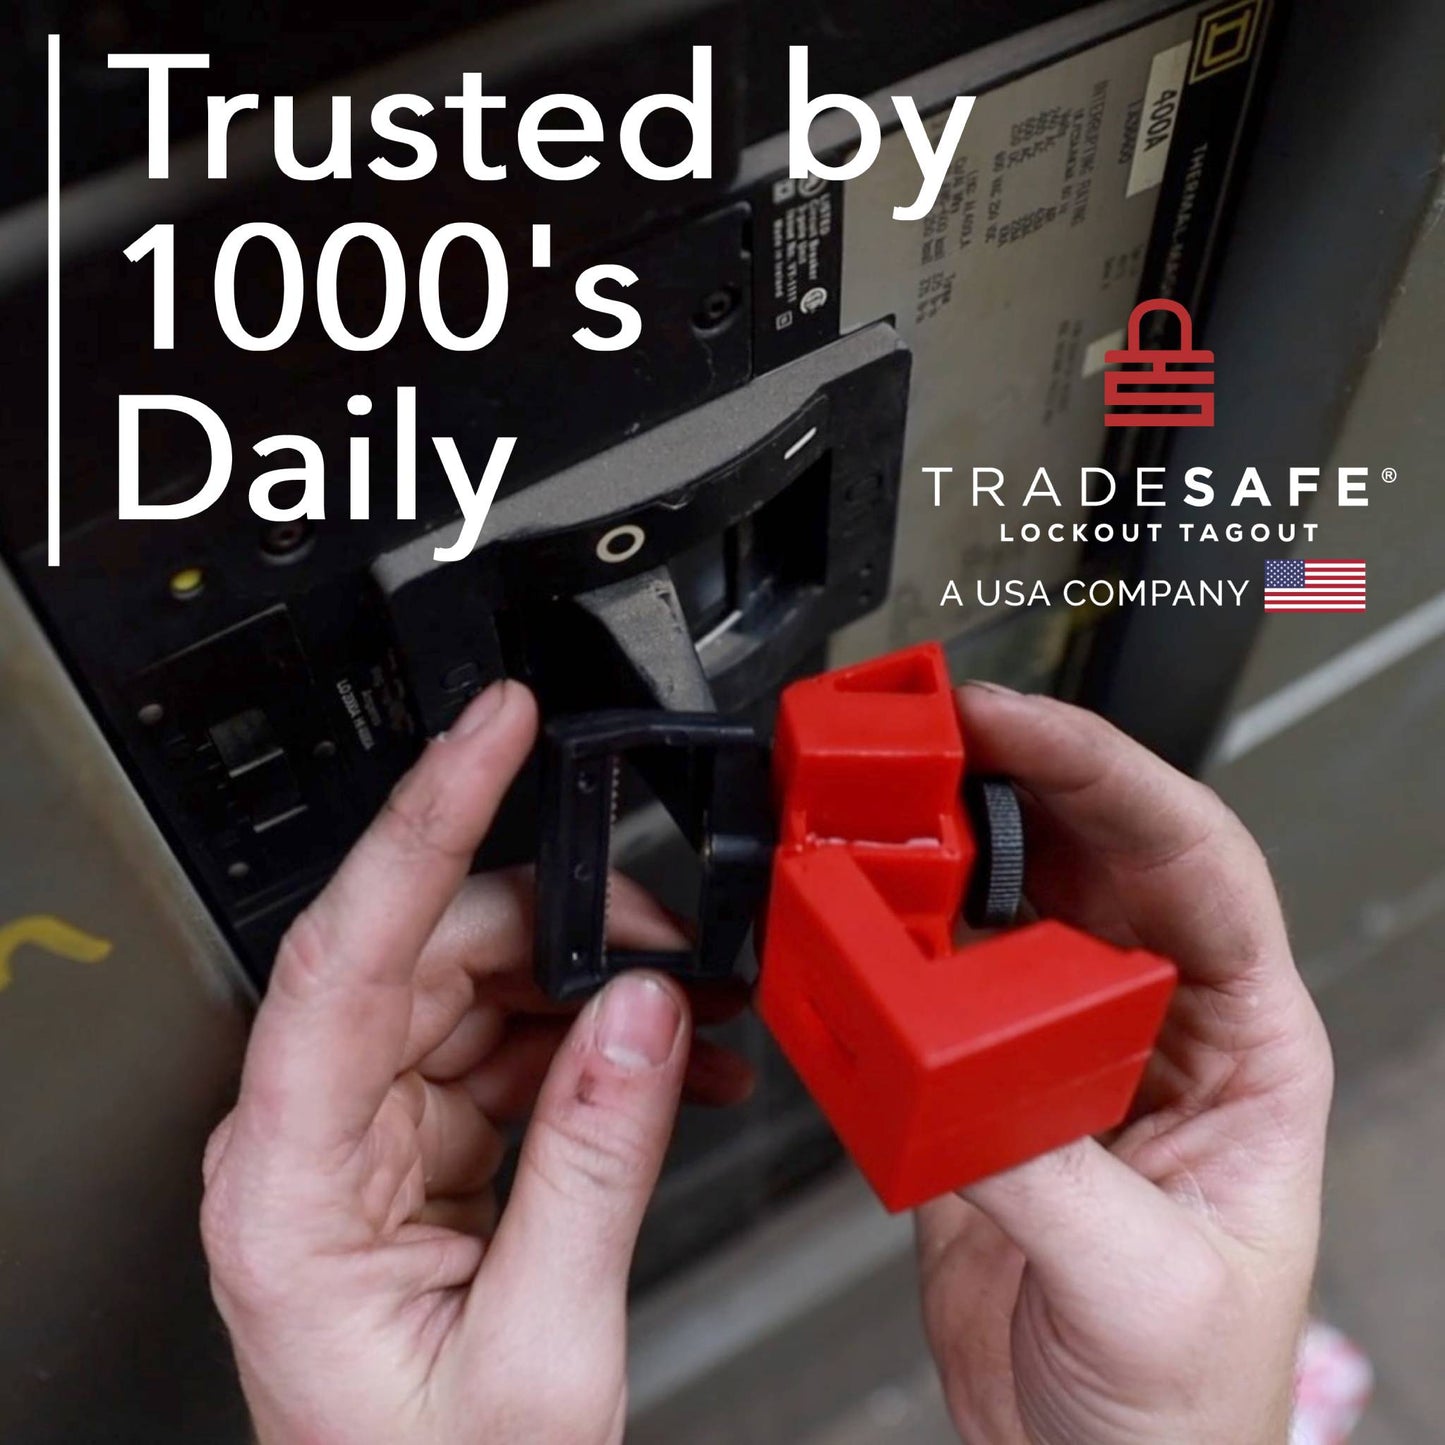 tradesafe lockout tagout branding image; trusted by 1000's daily